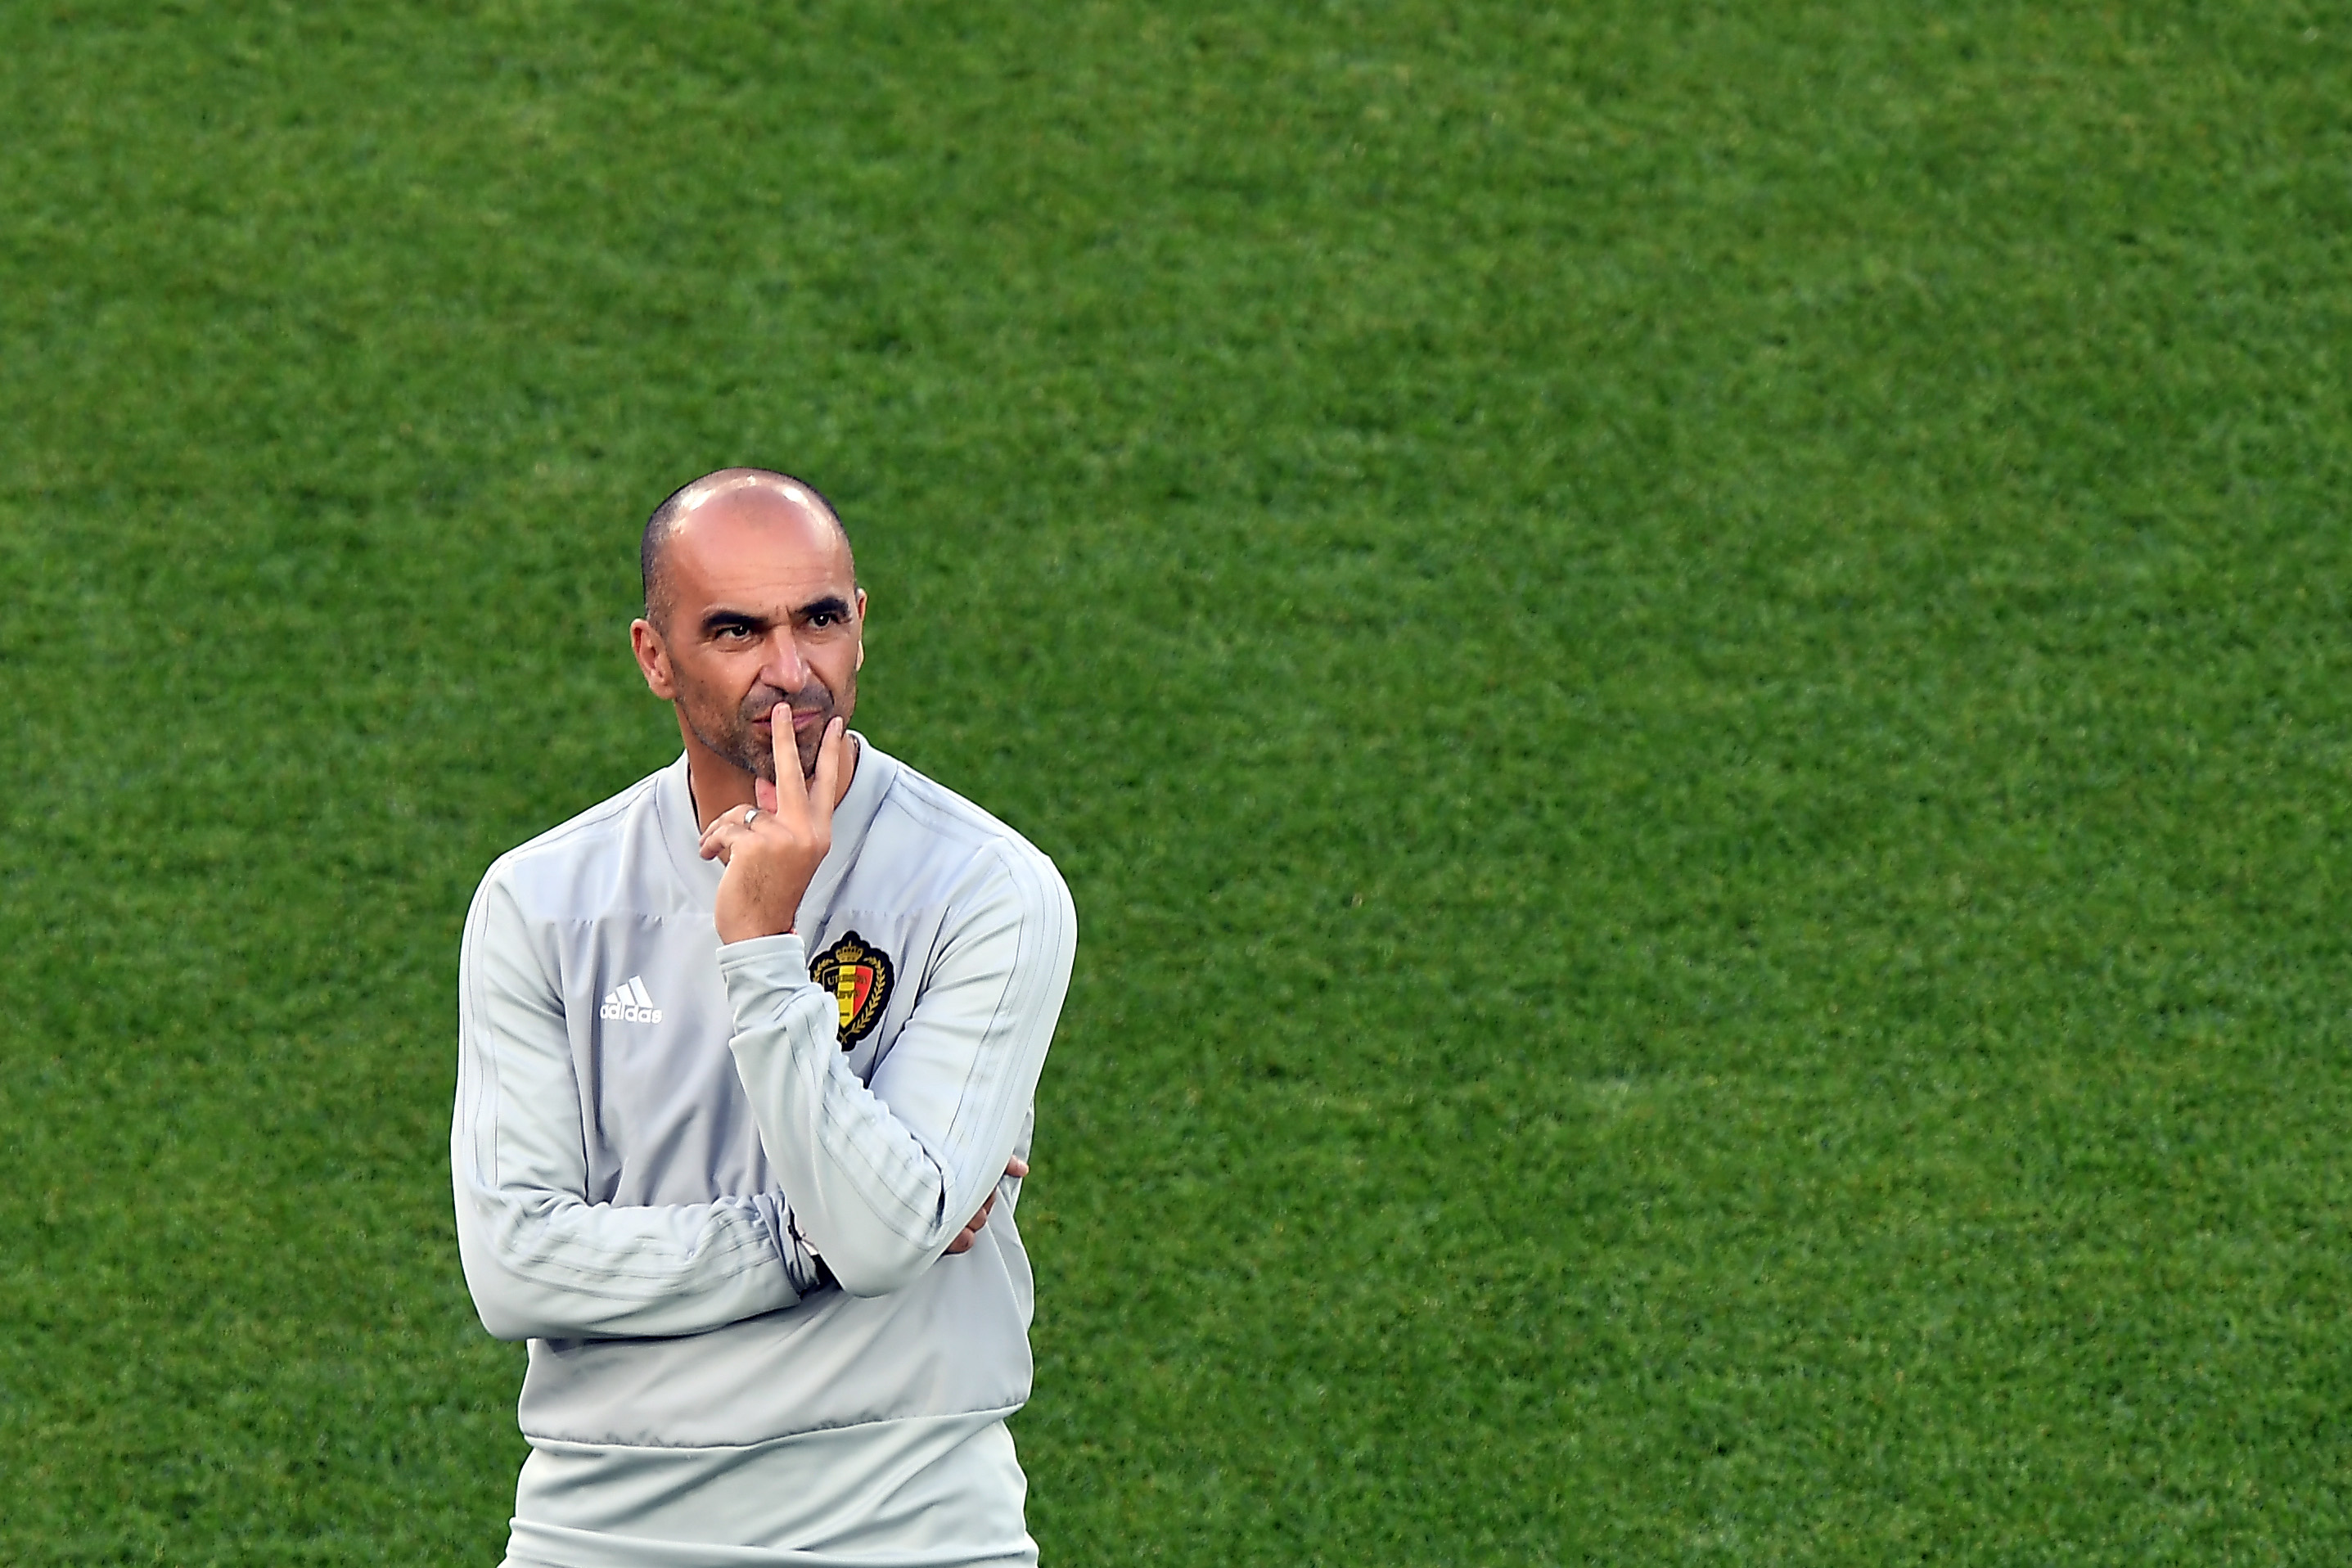 Belgium's coach Roberto Martinez attends a training session on the eve of the Russia 2018 World Cup Group G football match between England and Belgium at the Kaliningrad stadium on June 27, 2018 in Kaliningrad. (Photo by Attila KISBENEDEK / AFP)        (Photo credit should read ATTILA KISBENEDEK/AFP/Getty Images)